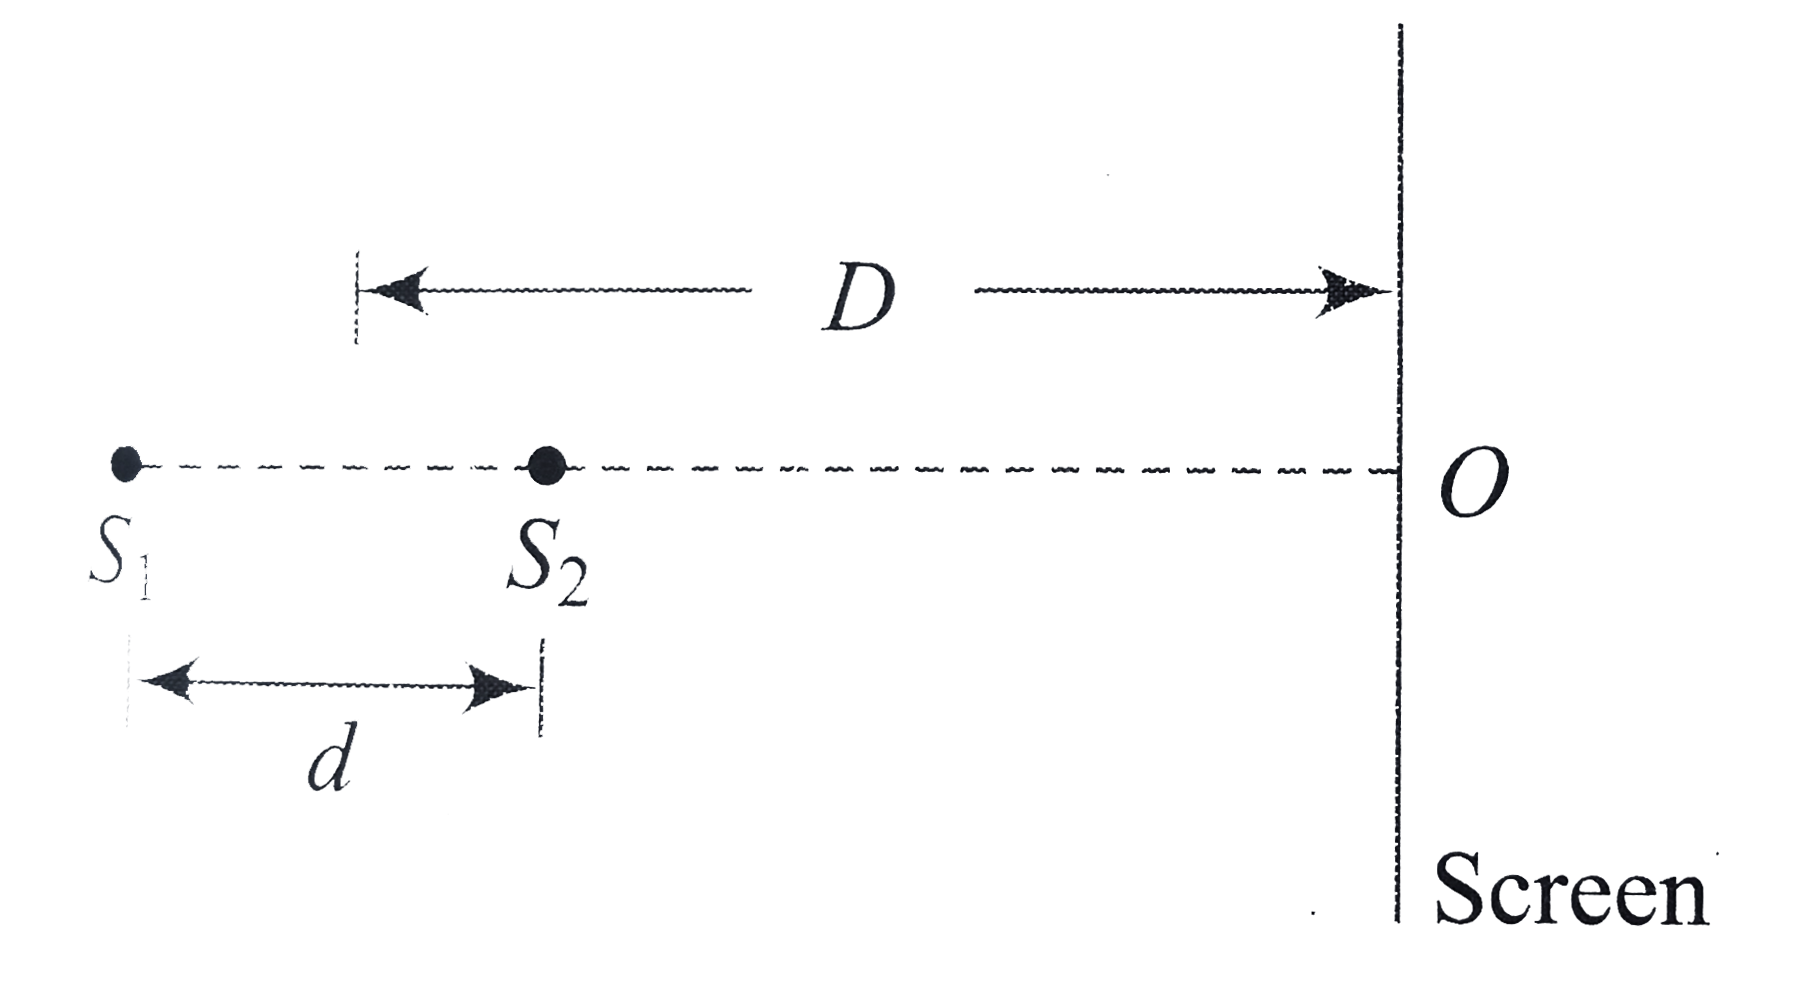 Two points nonochromatic and coherent sources of light of wavelength lambda each are placed as shown in figure. The initial phase difference between the sources is zero O. (d gt gt d). Mark the correct statement(s).